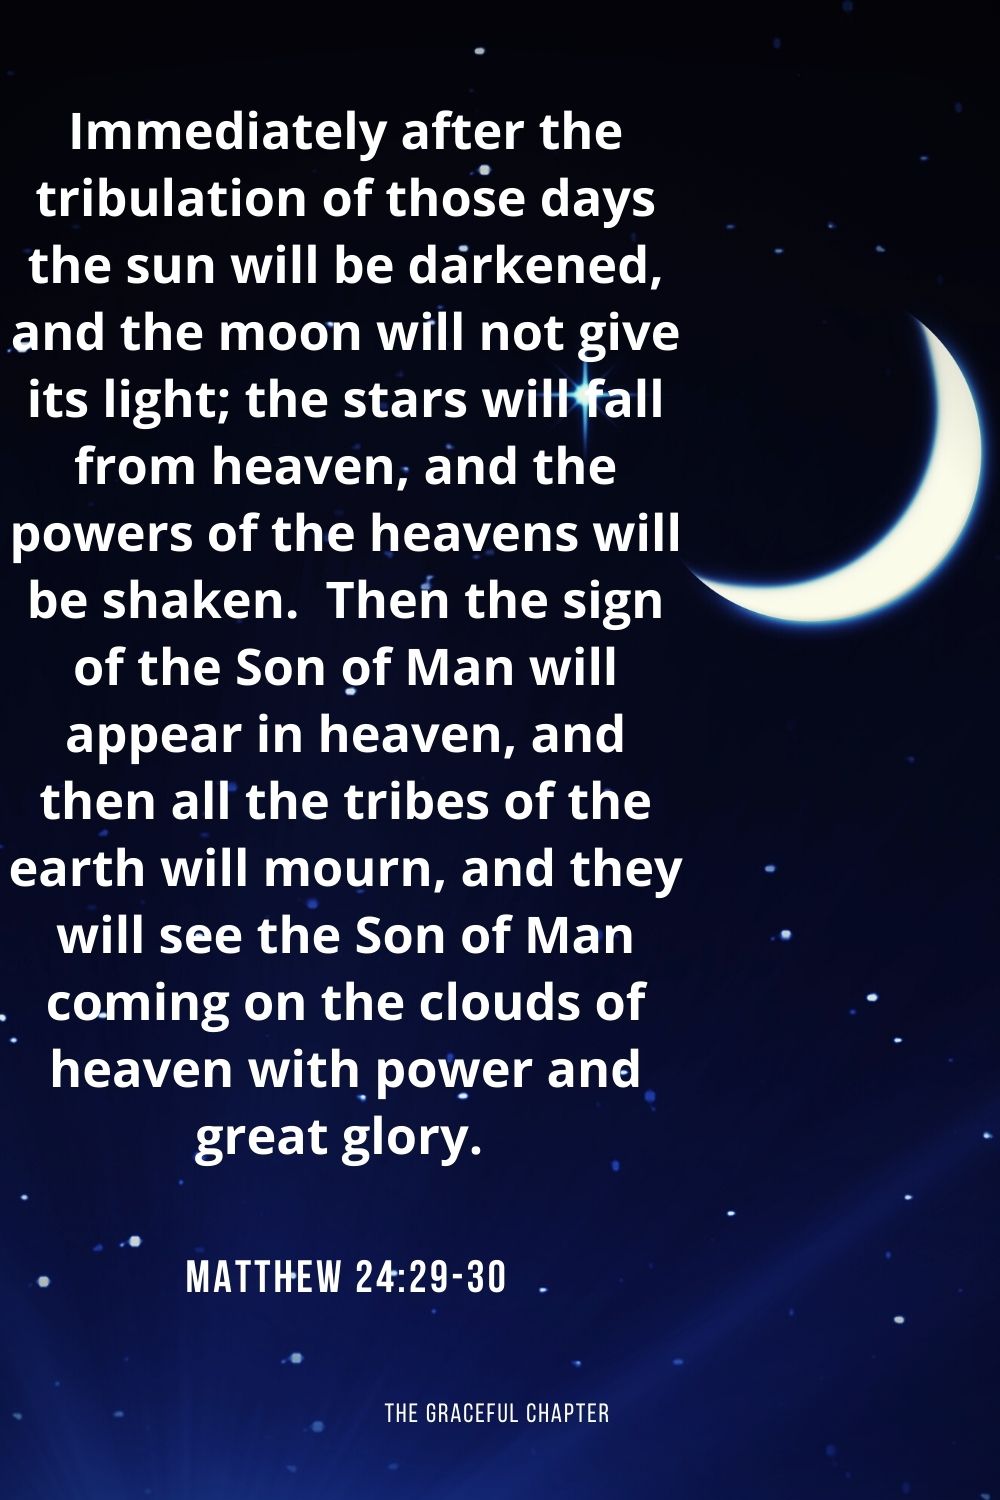 Immediately after the tribulation of those days the sun will be darkened, and the moon will not give its light; the stars will fall from heaven, and the powers of the heavens will be shaken.  Then the sign of the Son of Man will appear in heaven, and then all the tribes of the earth will mourn, and they will see the Son of Man coming on the clouds of heaven with power and great glory. Matthew 24:29-30